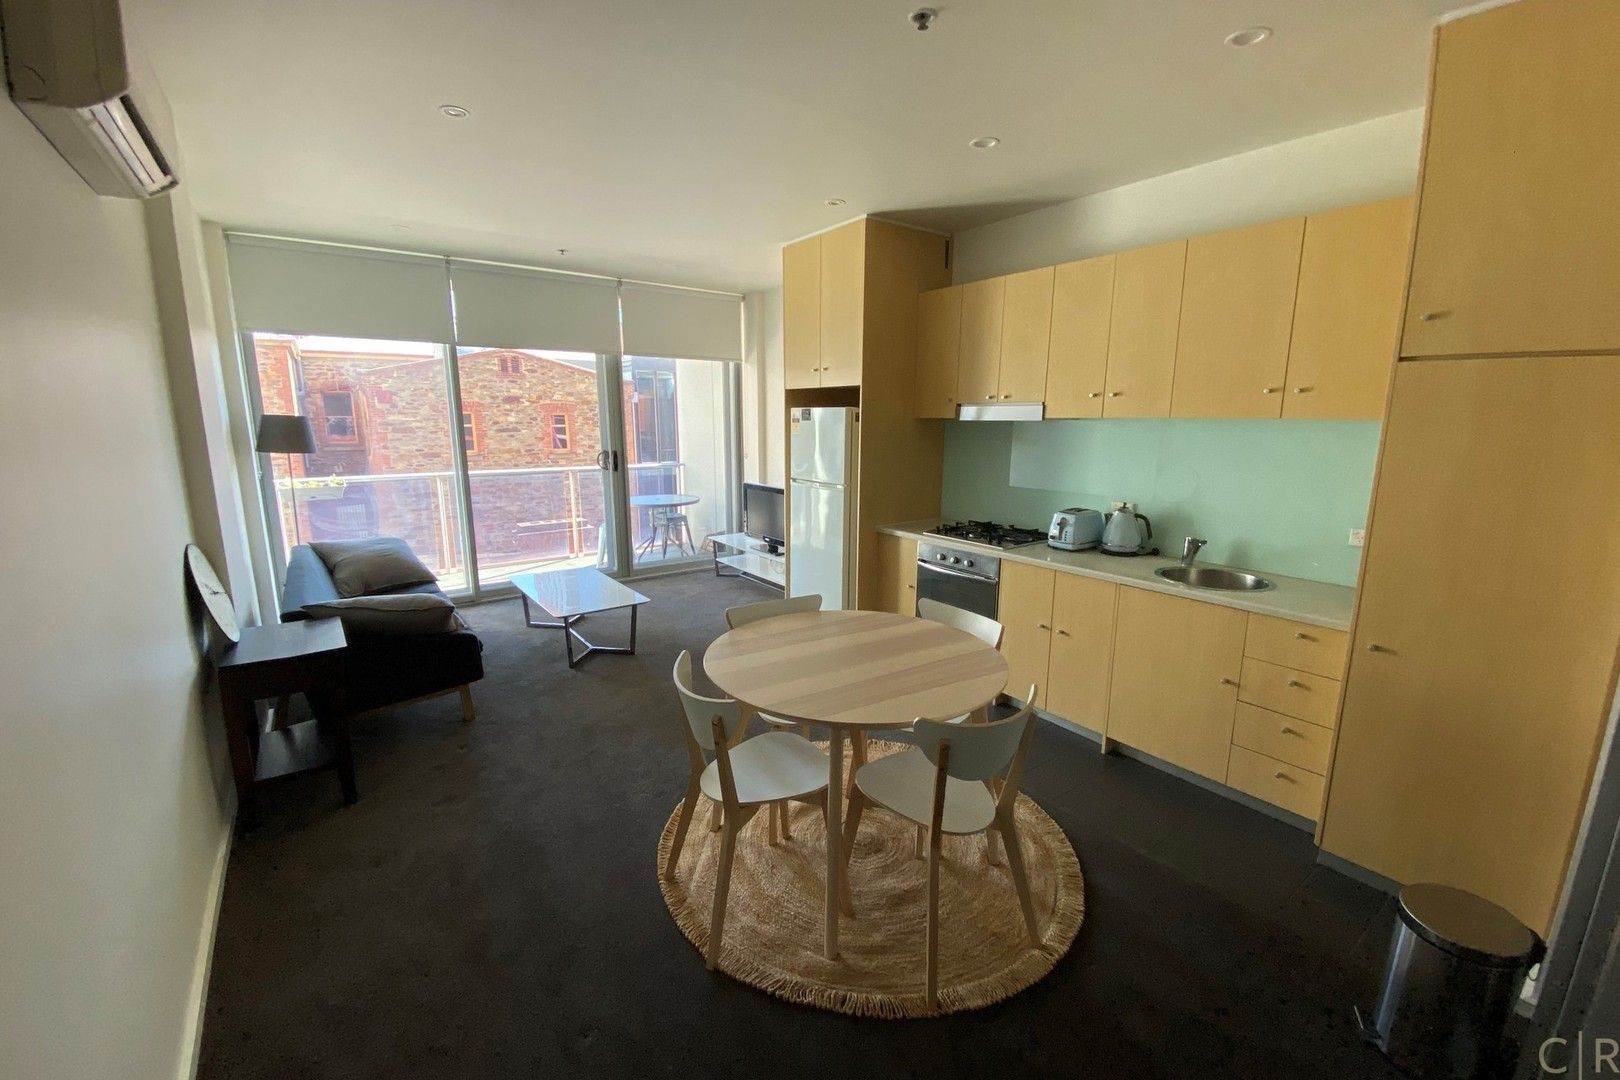 2 bedrooms Apartment / Unit / Flat in 46/45 York Street ADELAIDE SA, 5000